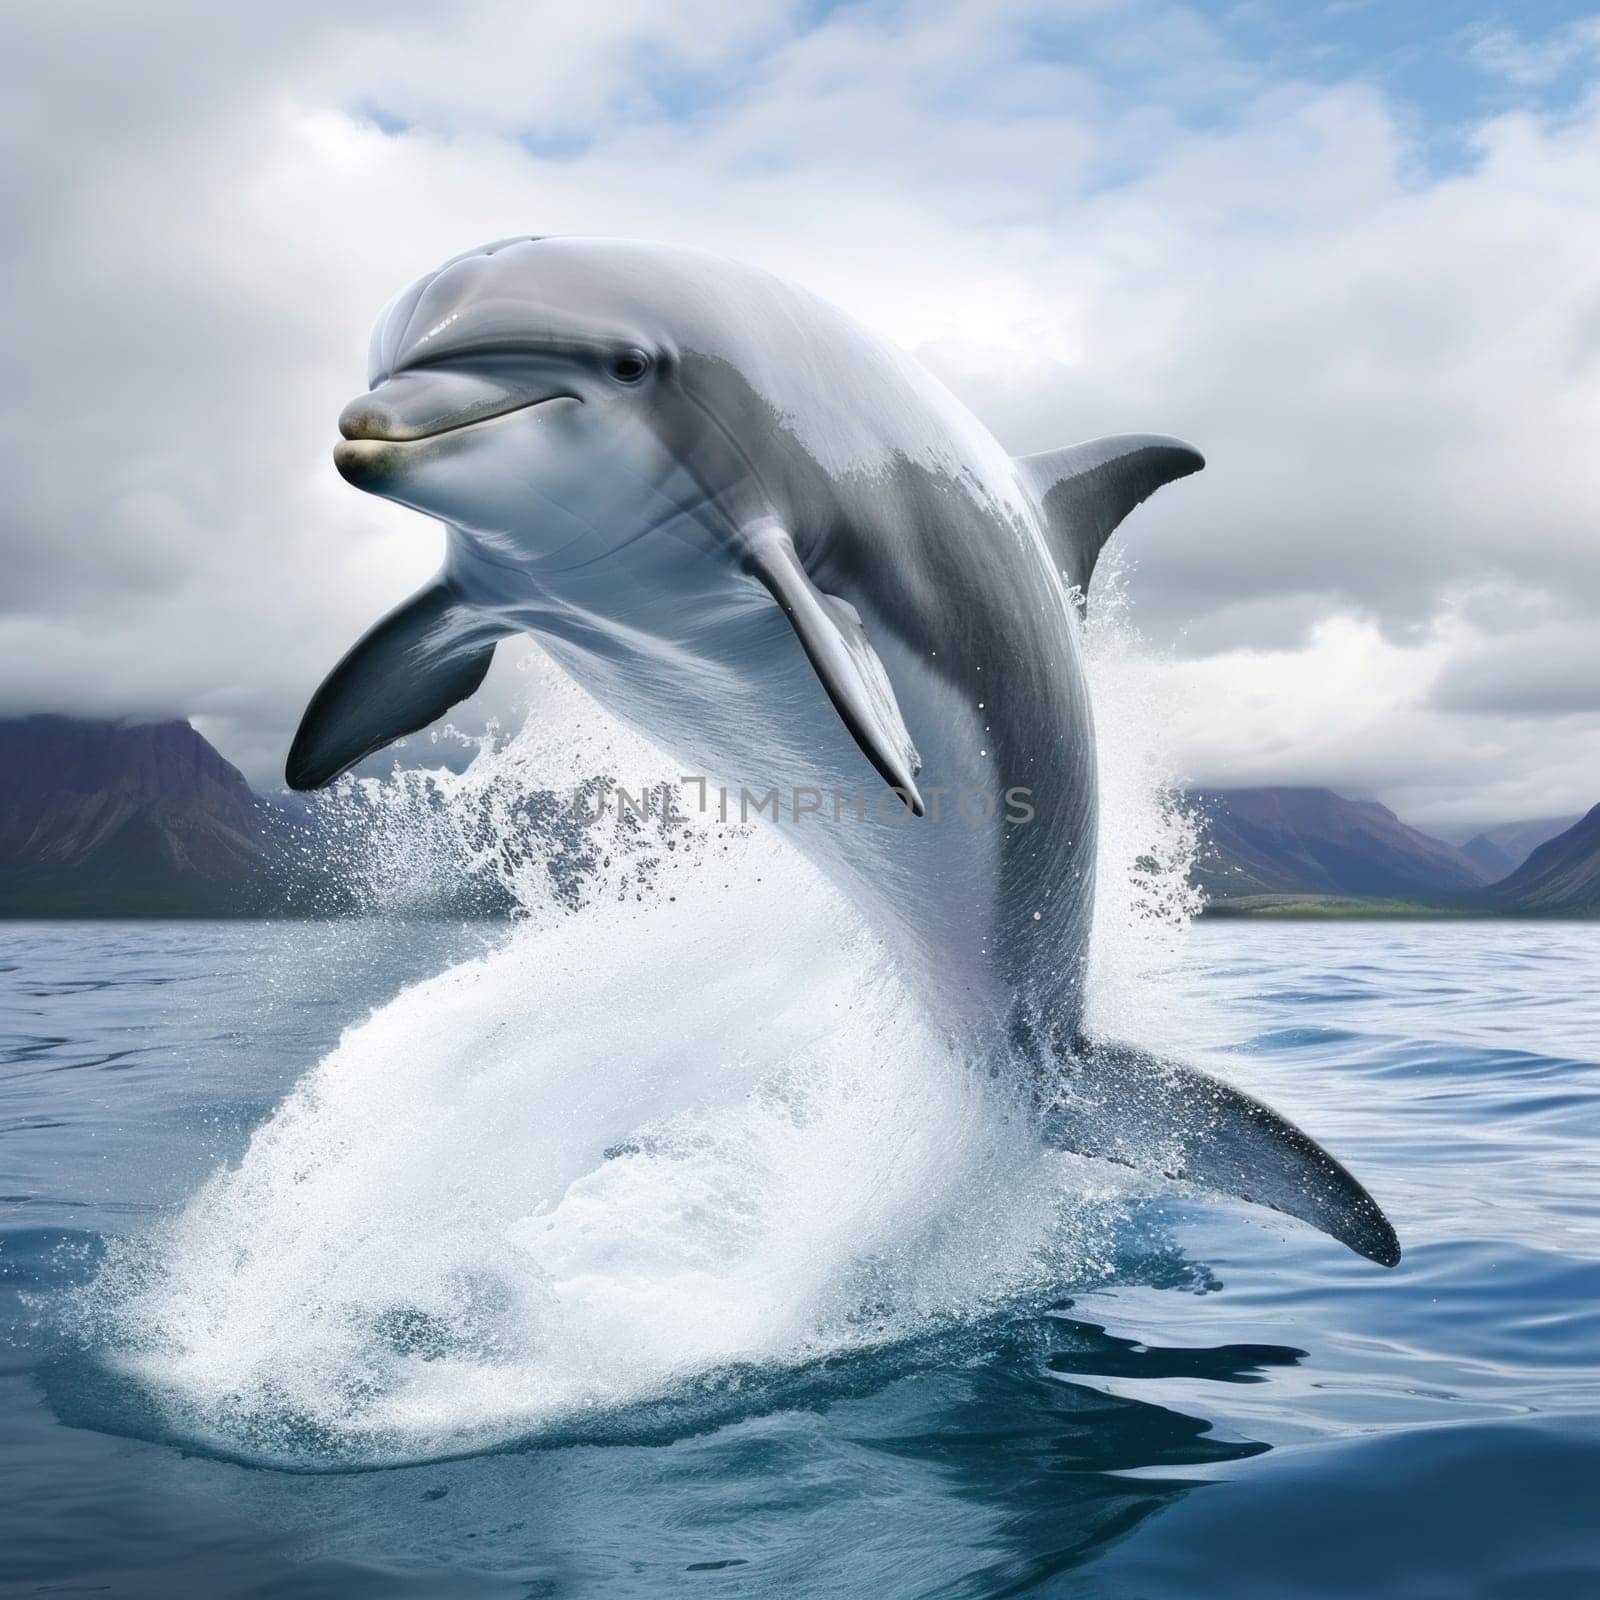 A dolphin jumping out of the water in front of mountains